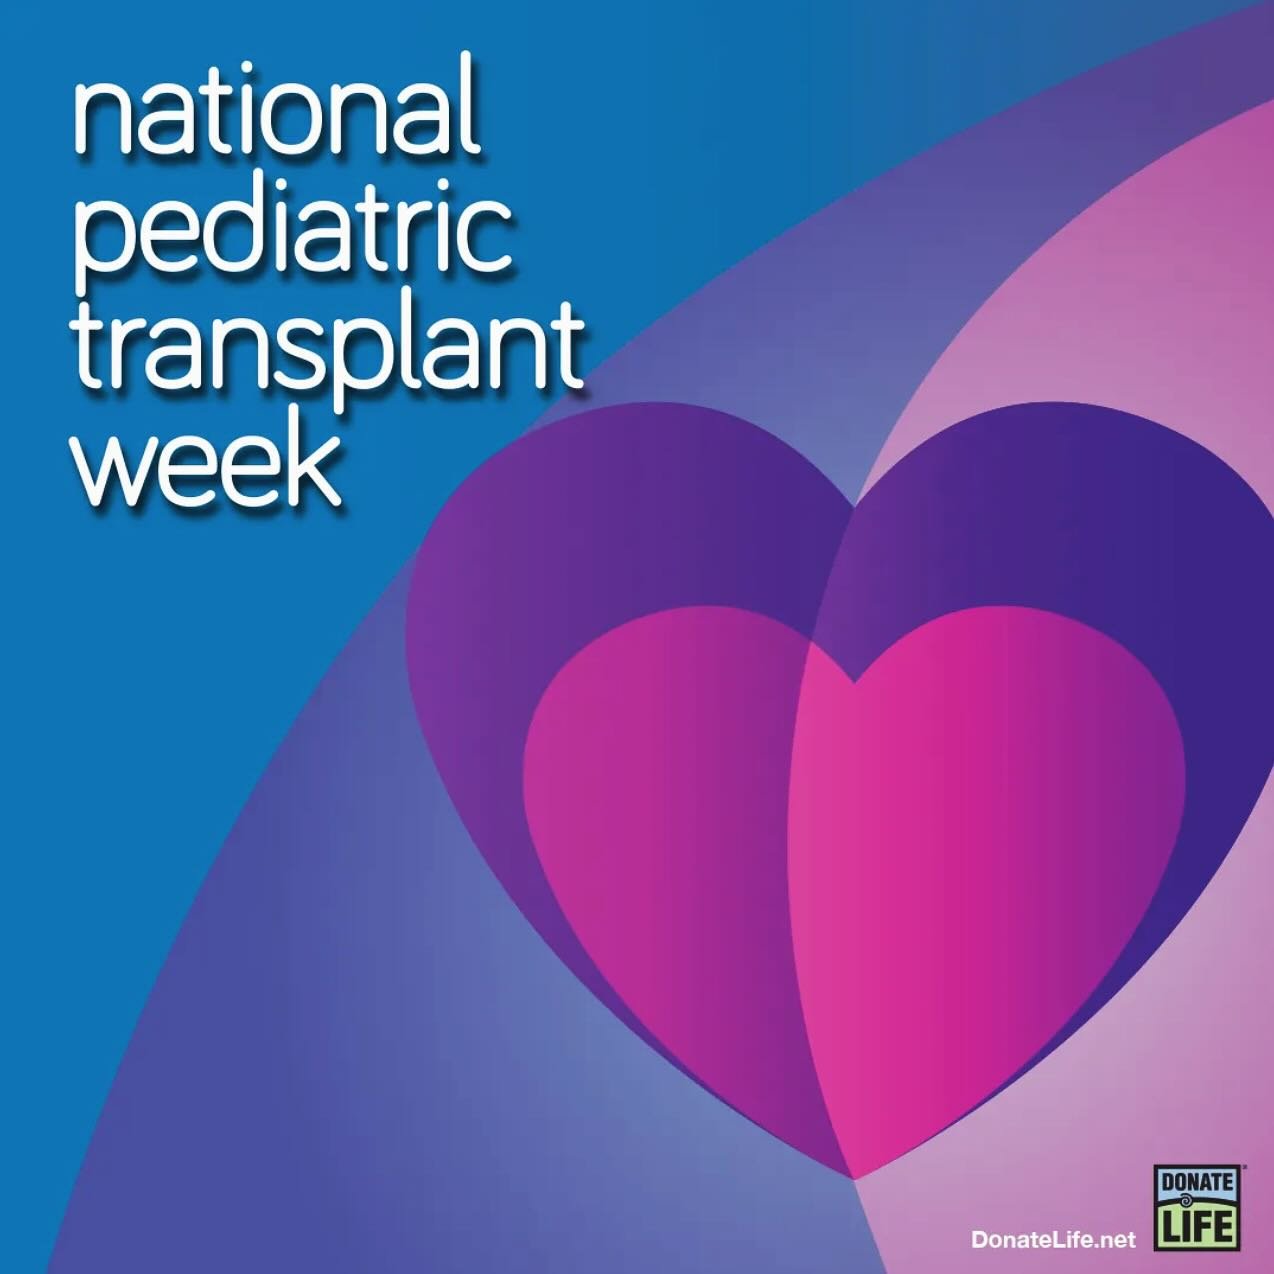 Honoring and celebrating the gift of life provided through pediatric donation and transplant 💙💚💙💚 National Pediatric Transplant Week takes place the last full week of National Donate Life Month in April. It focuses on the powerful message of endi